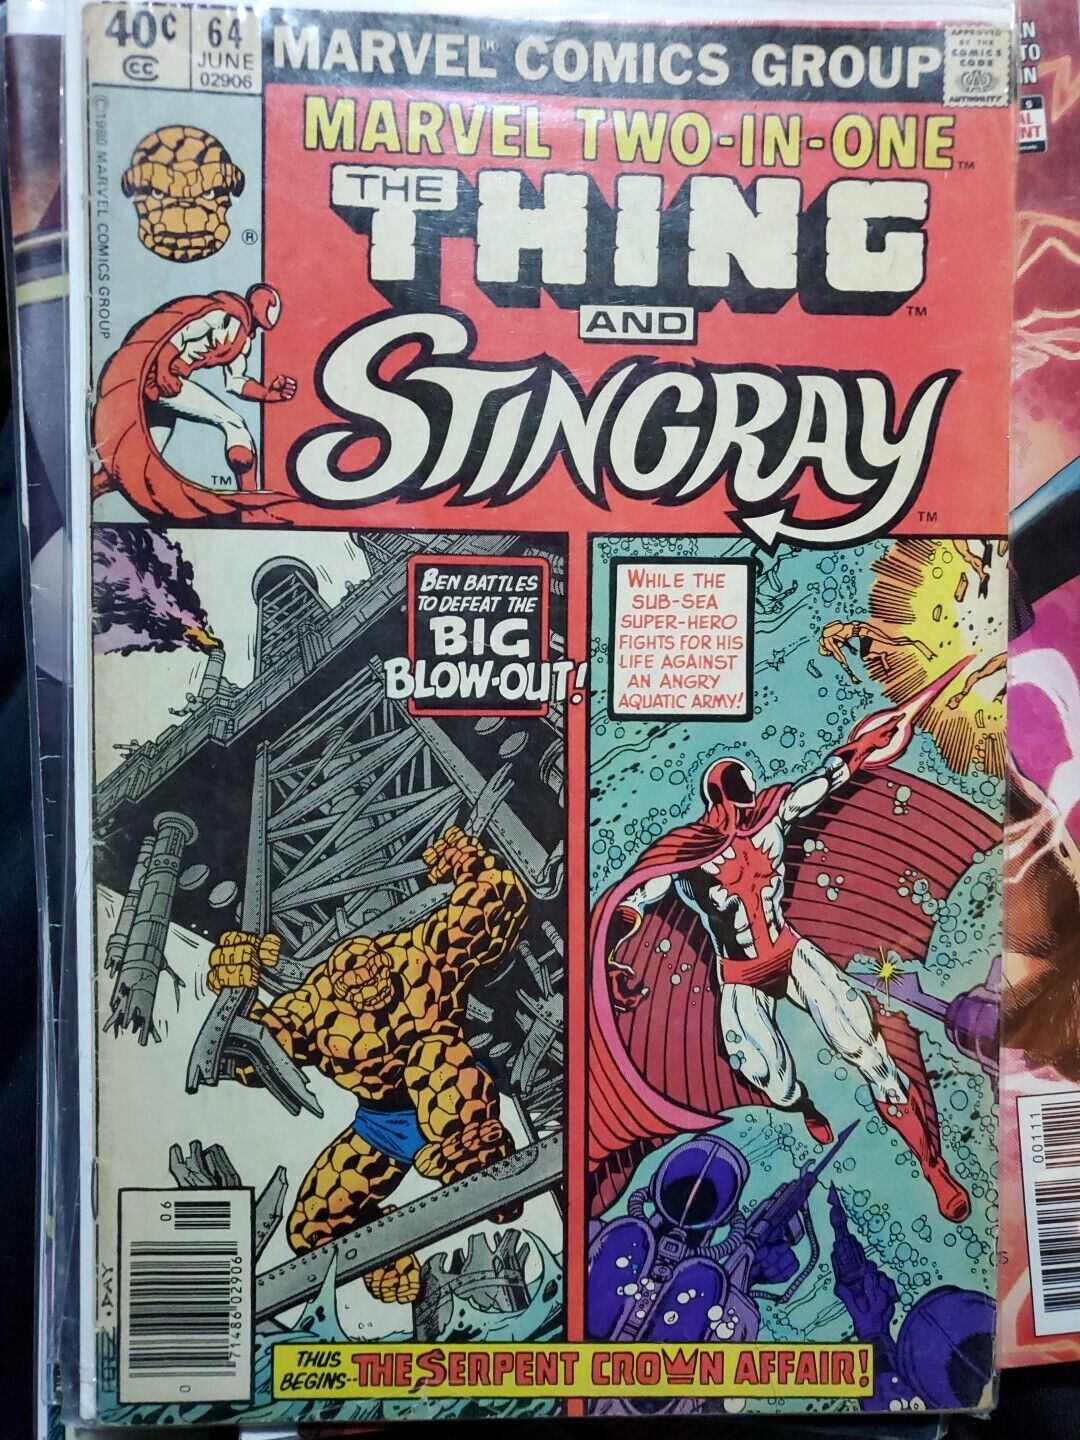 MARVEL TWO IN ONE #64 - THE THING AND STINGRAY JUNE 1980